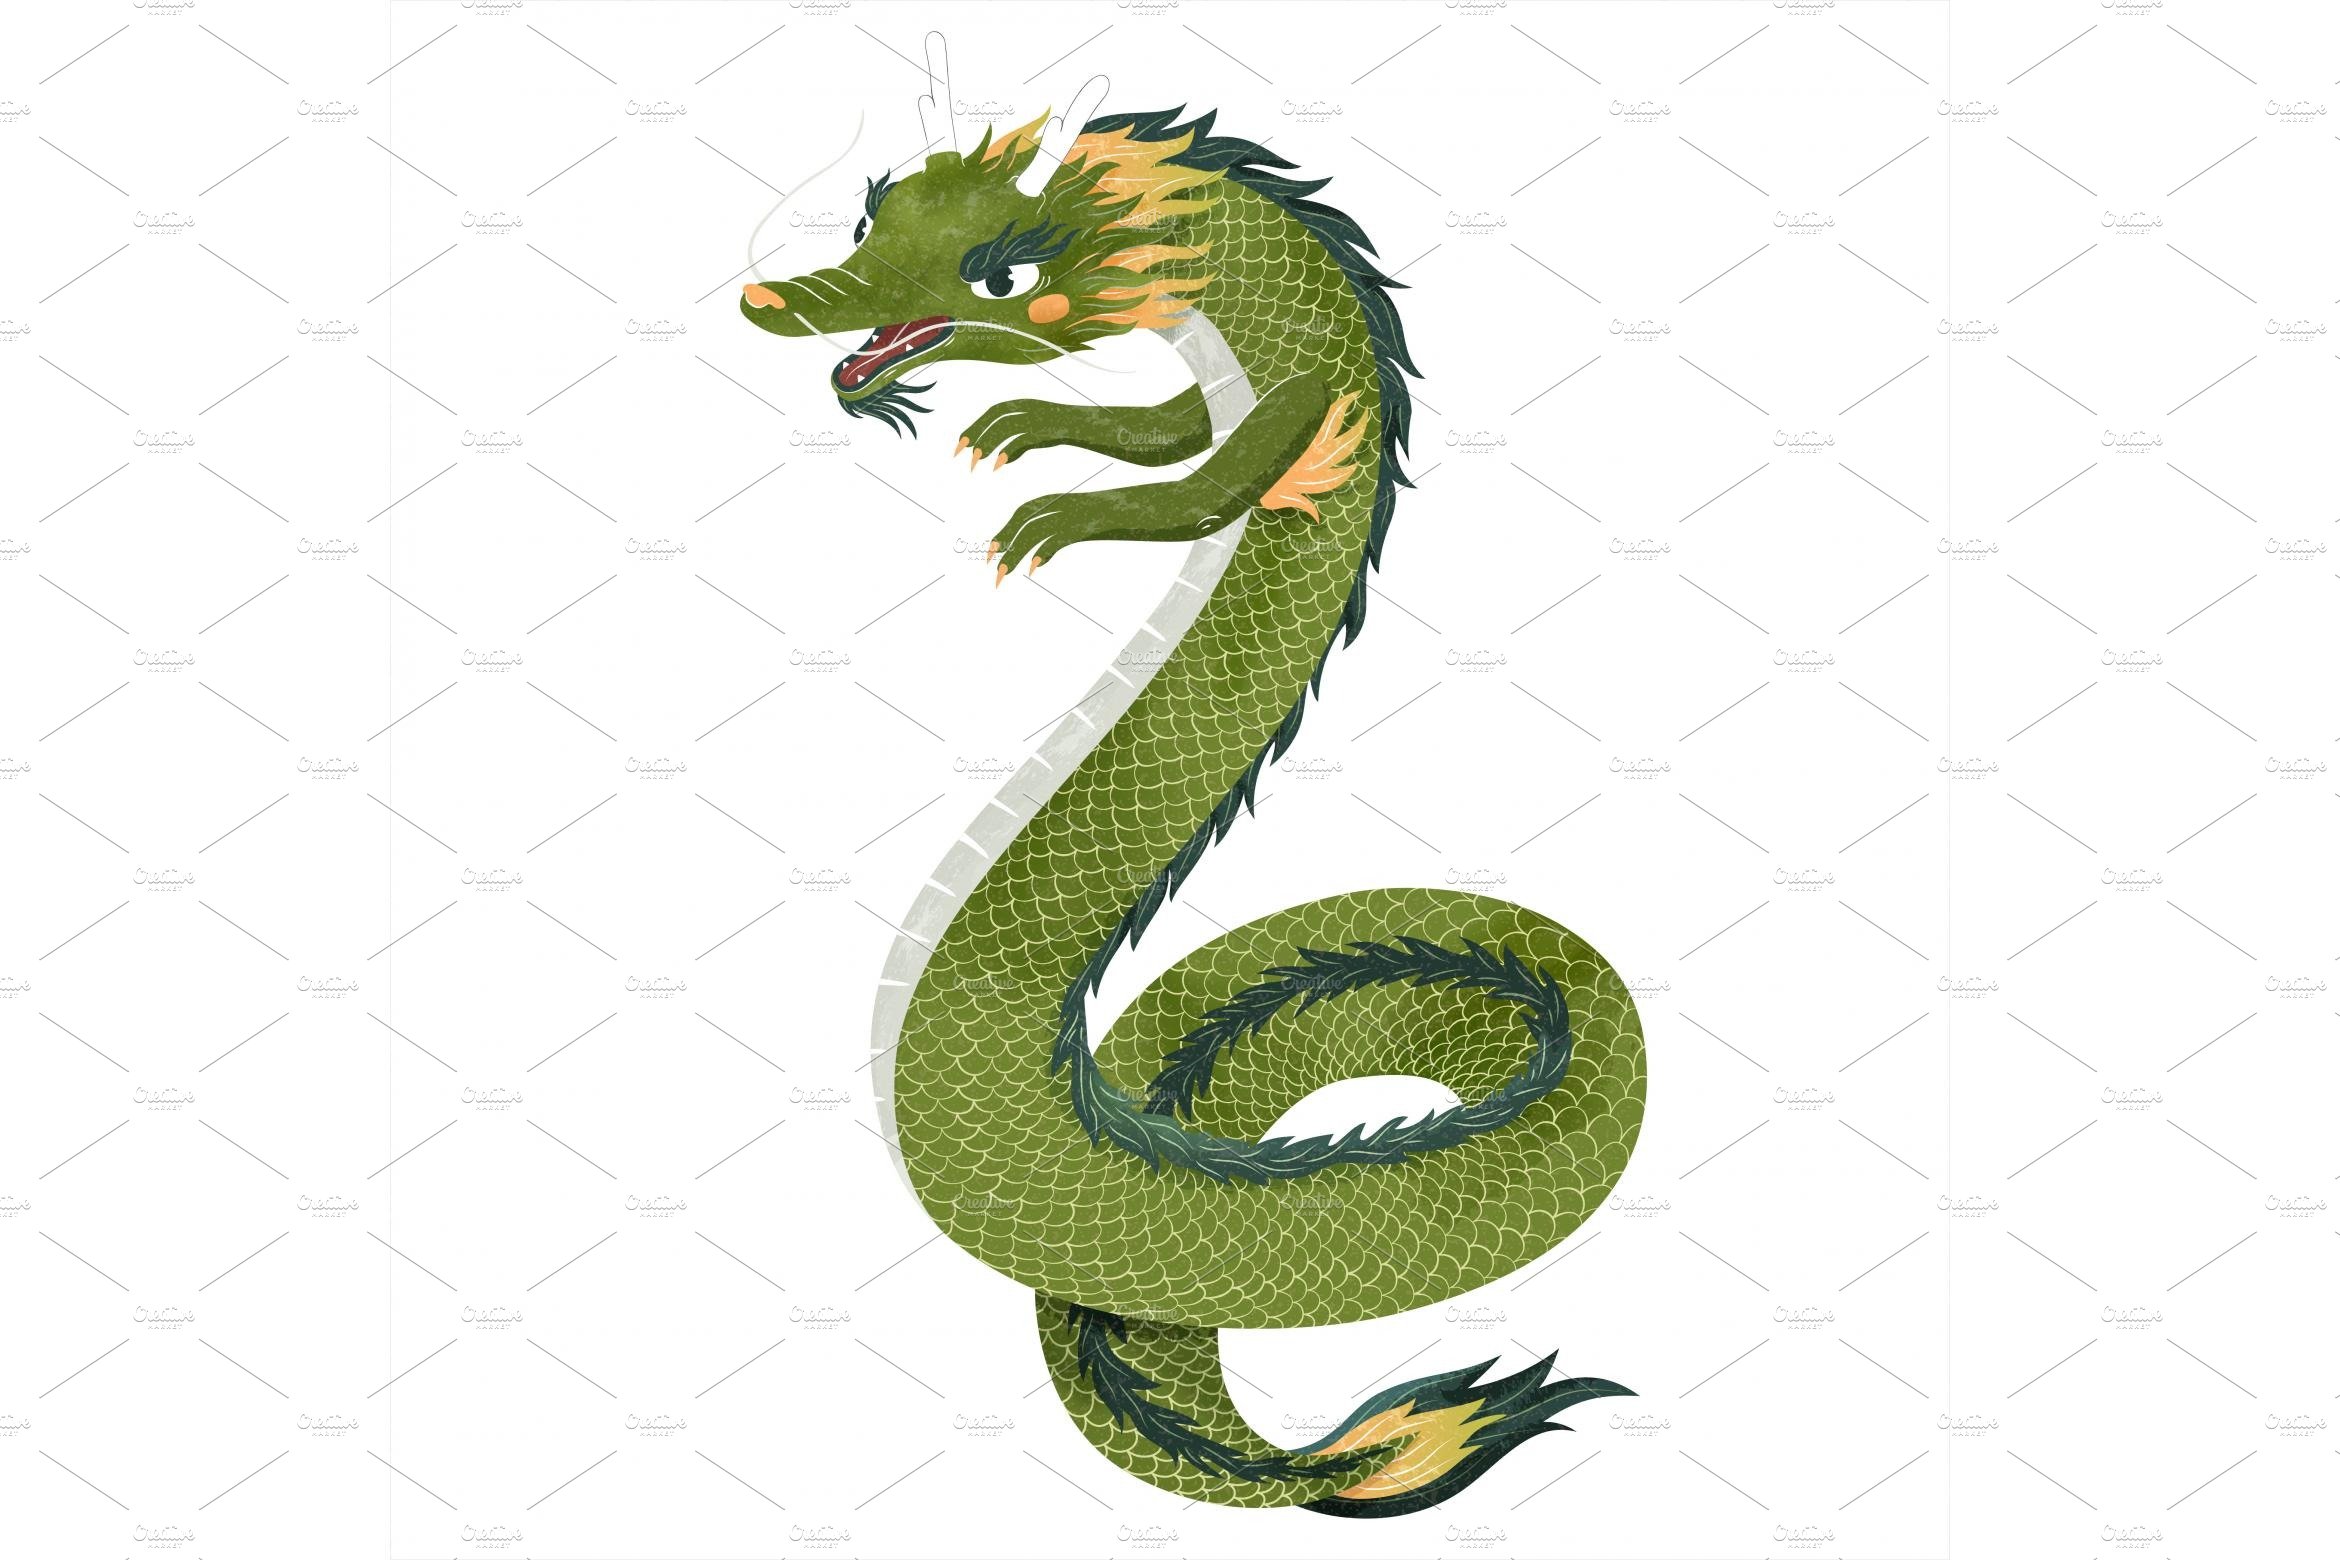 Adorable Chinese dragon cover image.